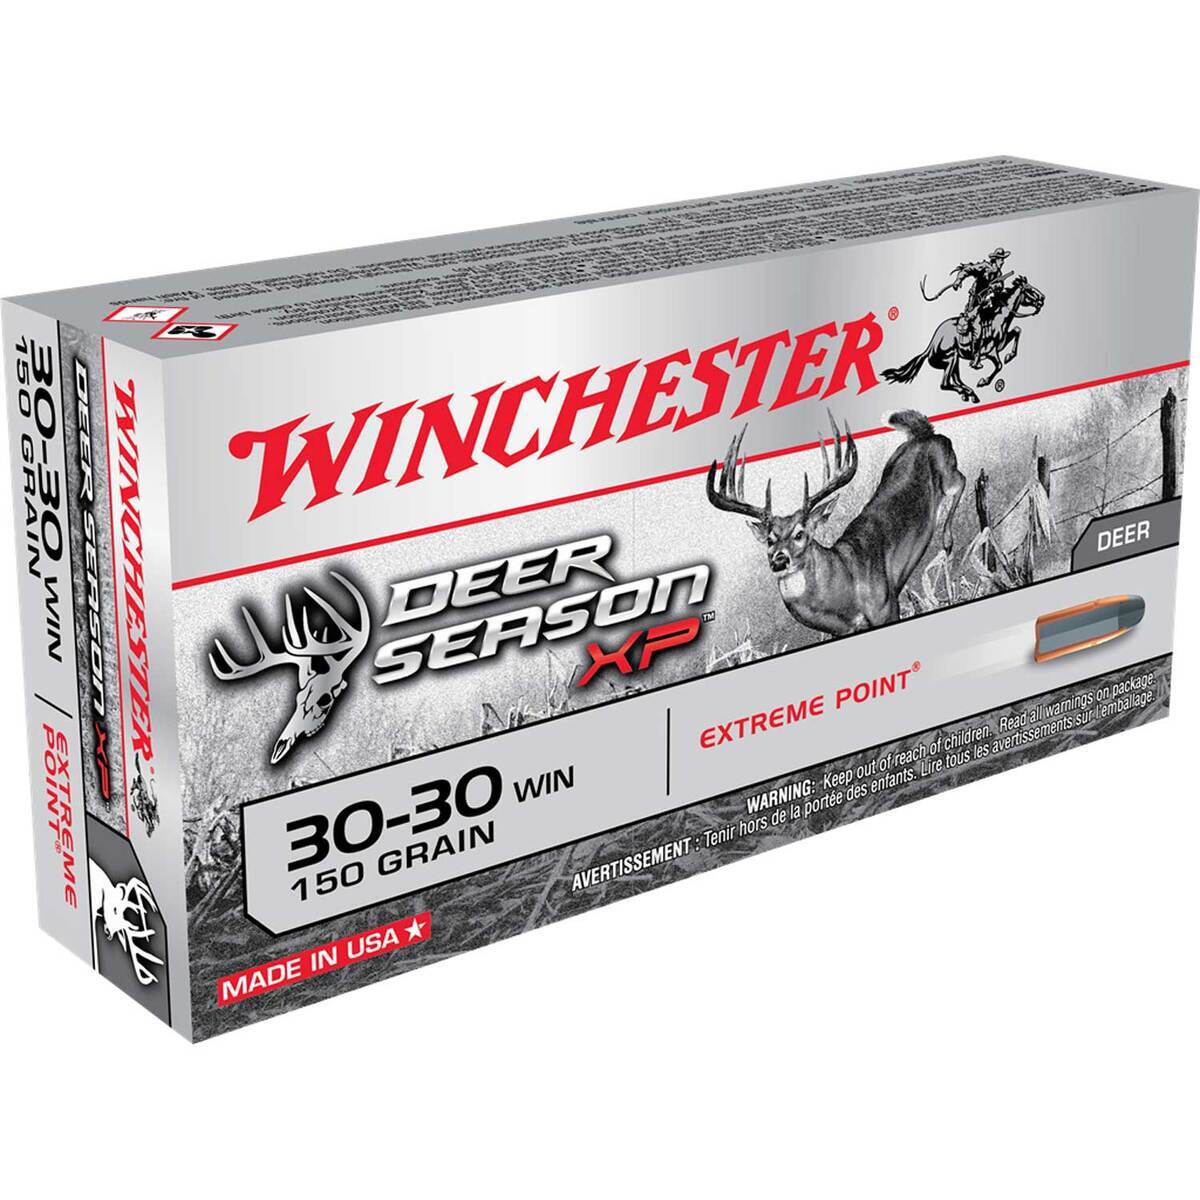 Winchester Deer Season XP 30-30 Winchester 150gr Extreme Point Rifle Ammo - 20 Rounds